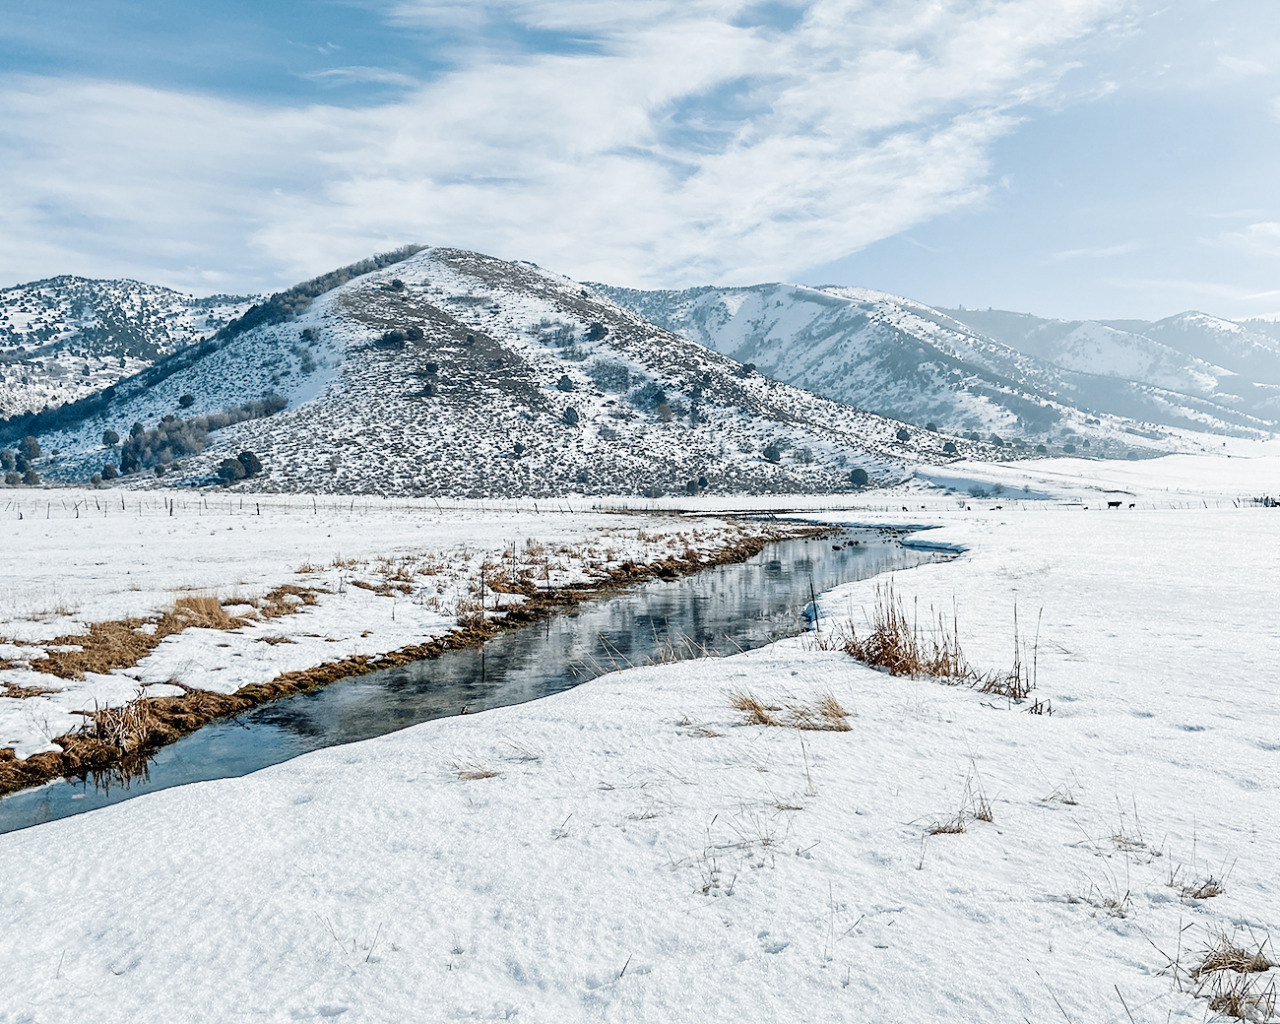 peaceful winter moments from jan 16. edited with my winter tones mobile presetInstagram #winter#frozen lake#winter landscape#peaceful#cold weather #best of nature #utah#utah winter#mountains#blue sky#mobile presets#photo edit#nature pics